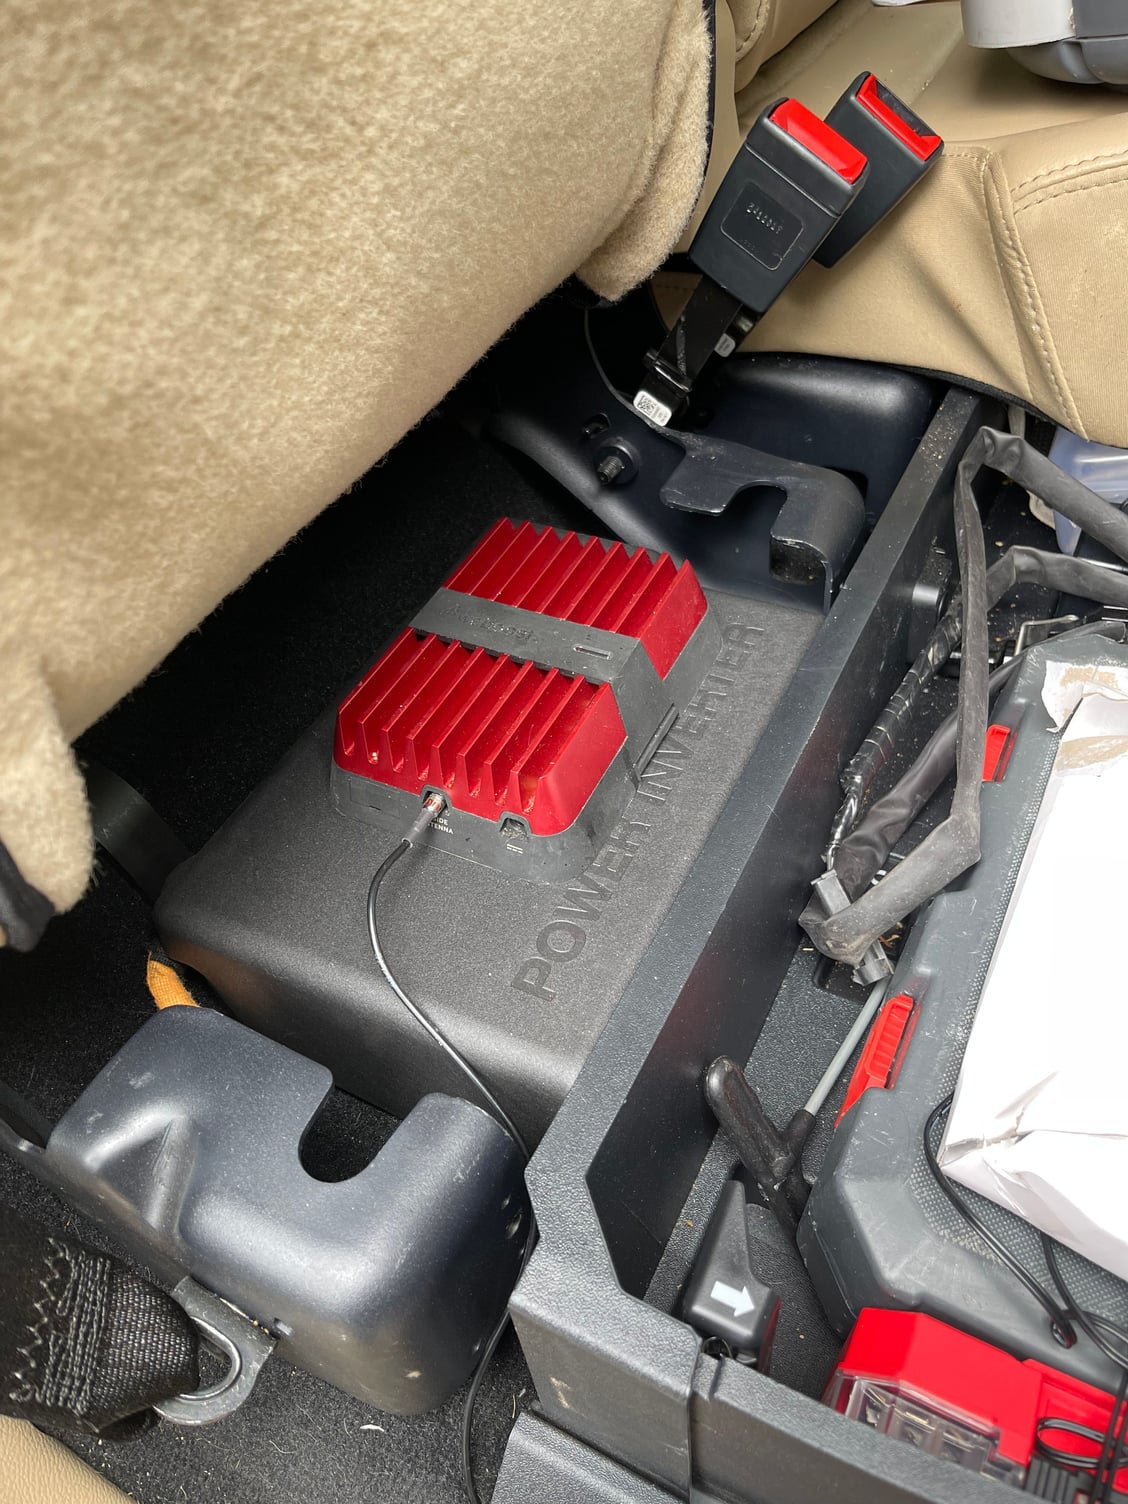 Installing a Power Inverter in a Car or Truck